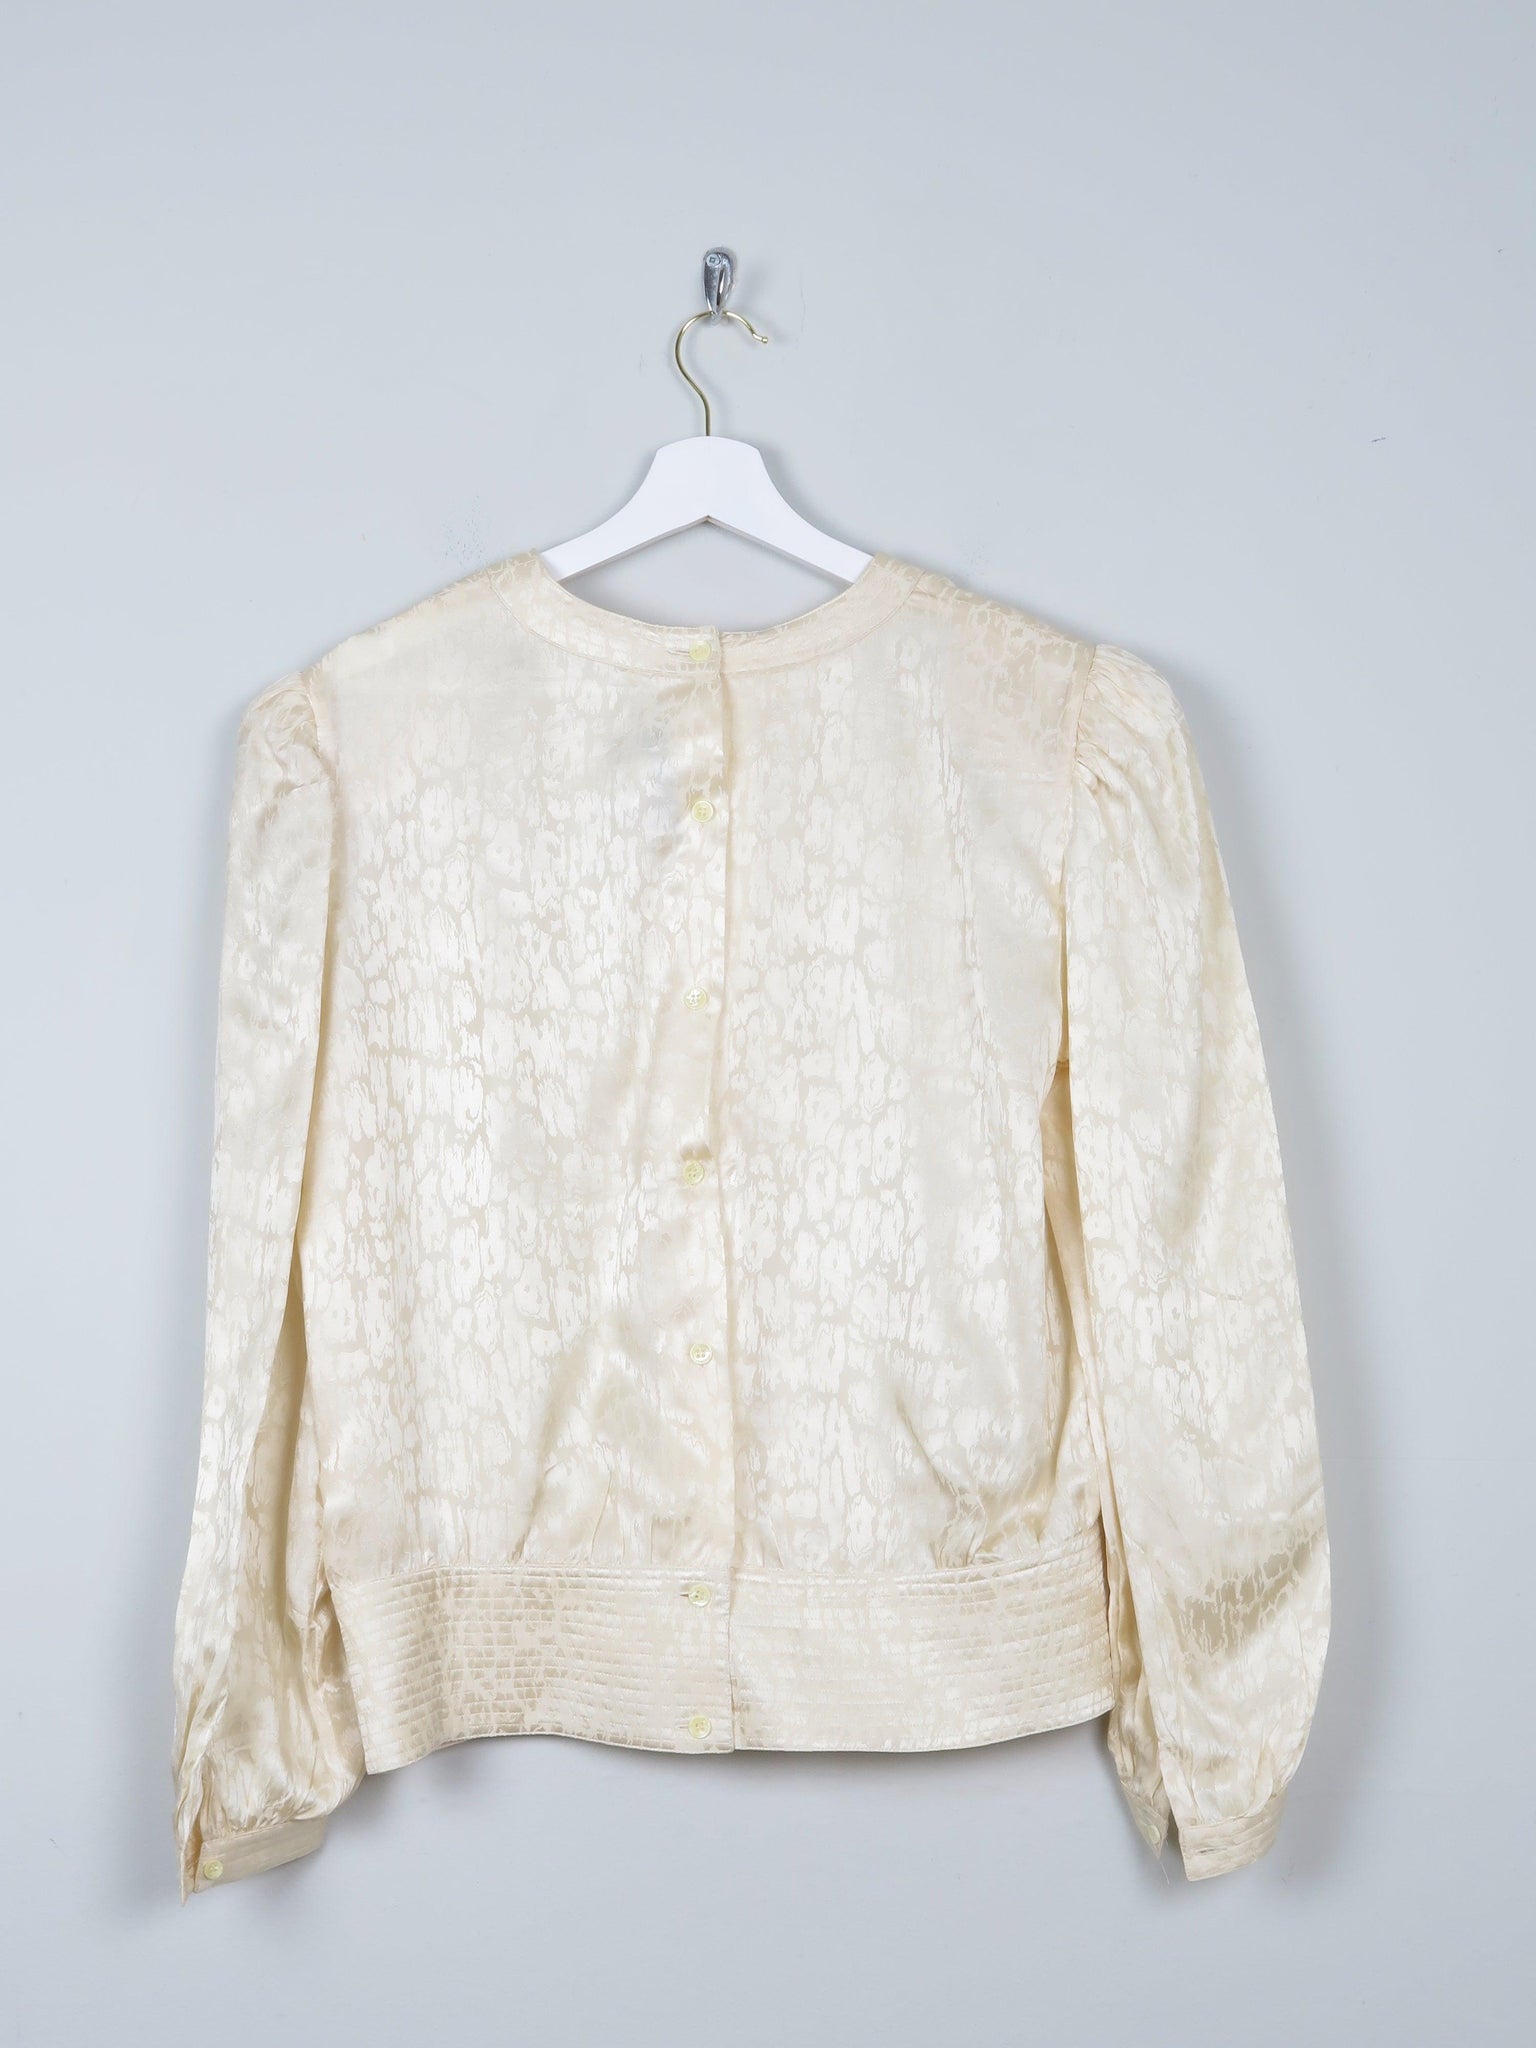 Women's Buttermilk Cream Vintage Blouse M Relaxed Fit - The Harlequin